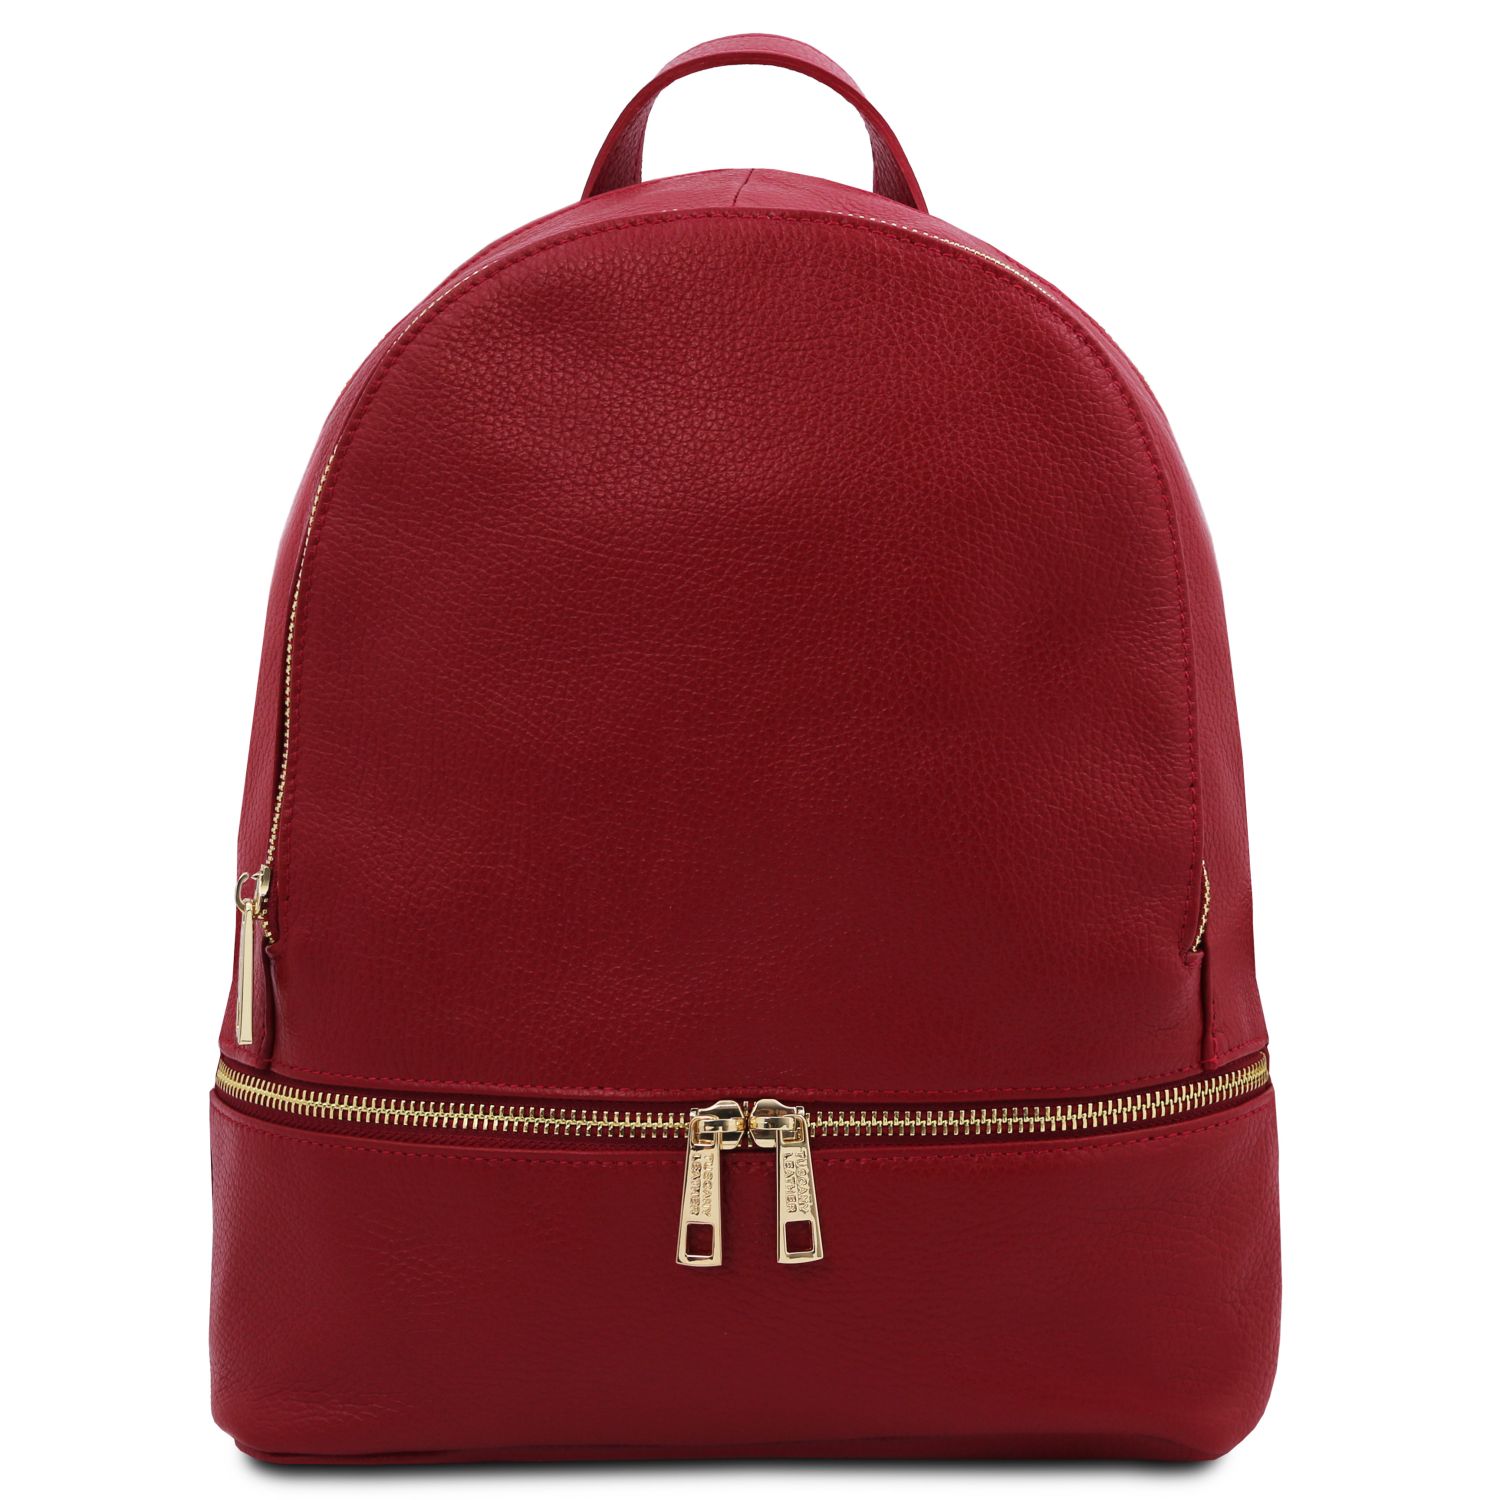 Back Open Double Side Zipper Anti-theft Backpack-Red (Large/Small) - Shop  omc Backpacks - Pinkoi